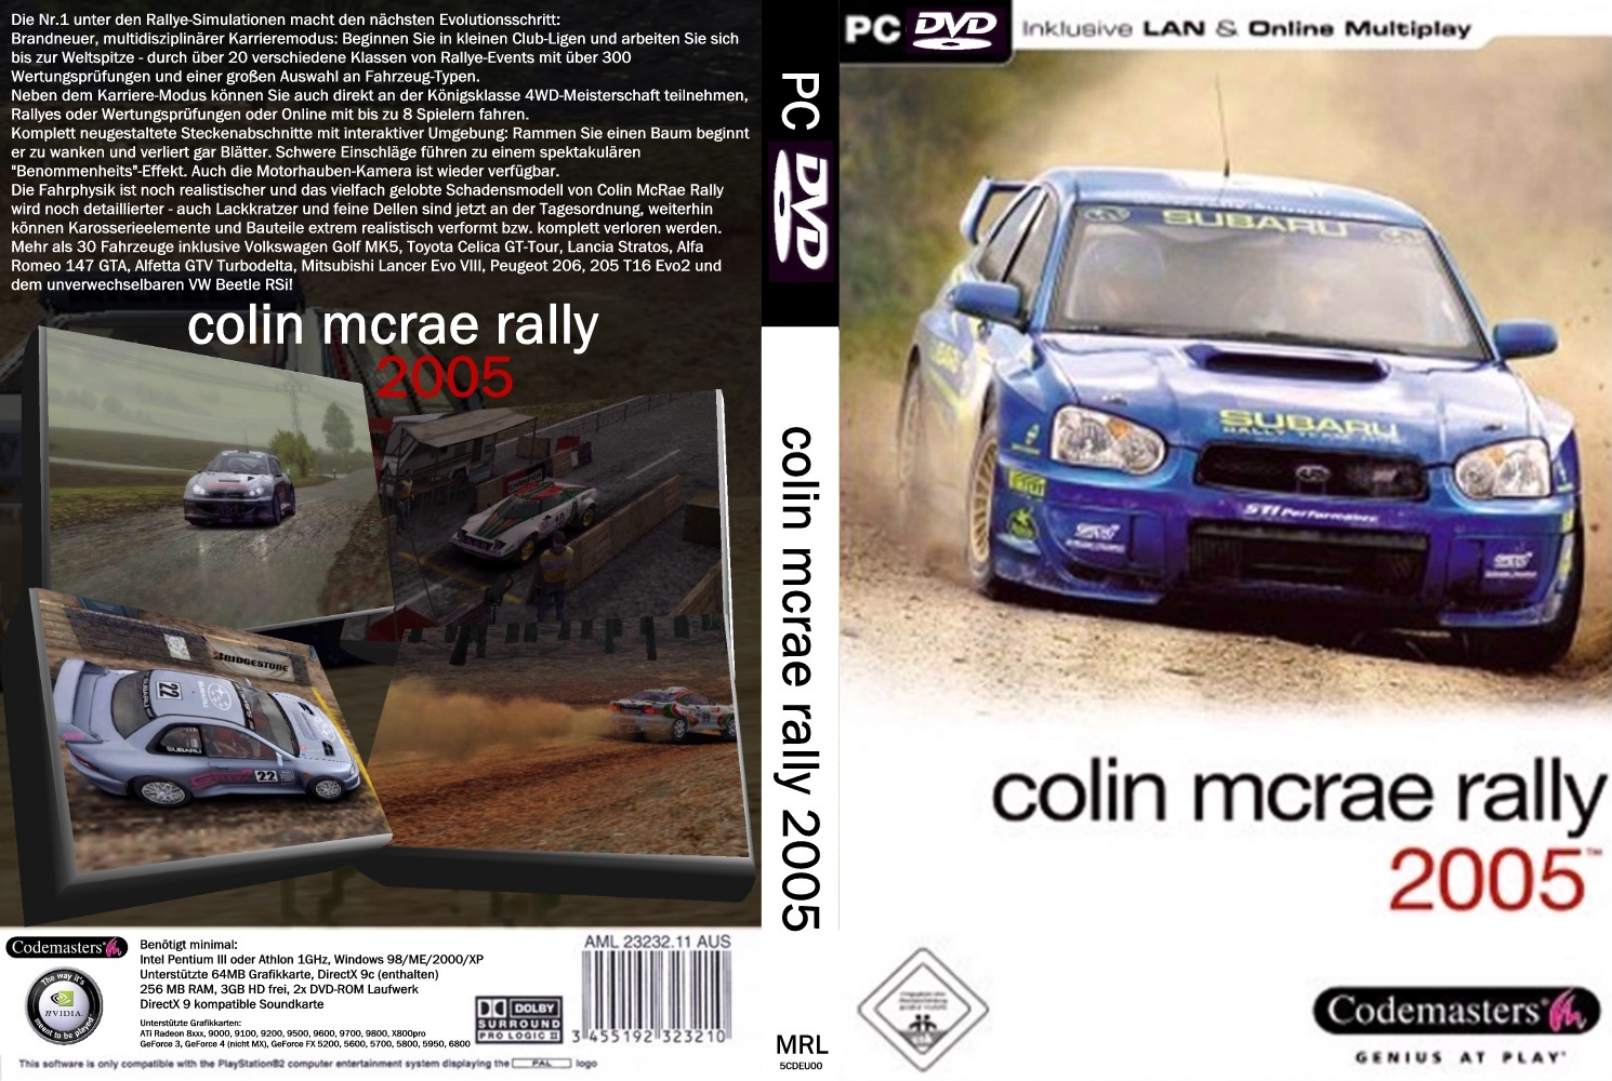 colin mcrae rally 2005 windows 7 32 bit patch download